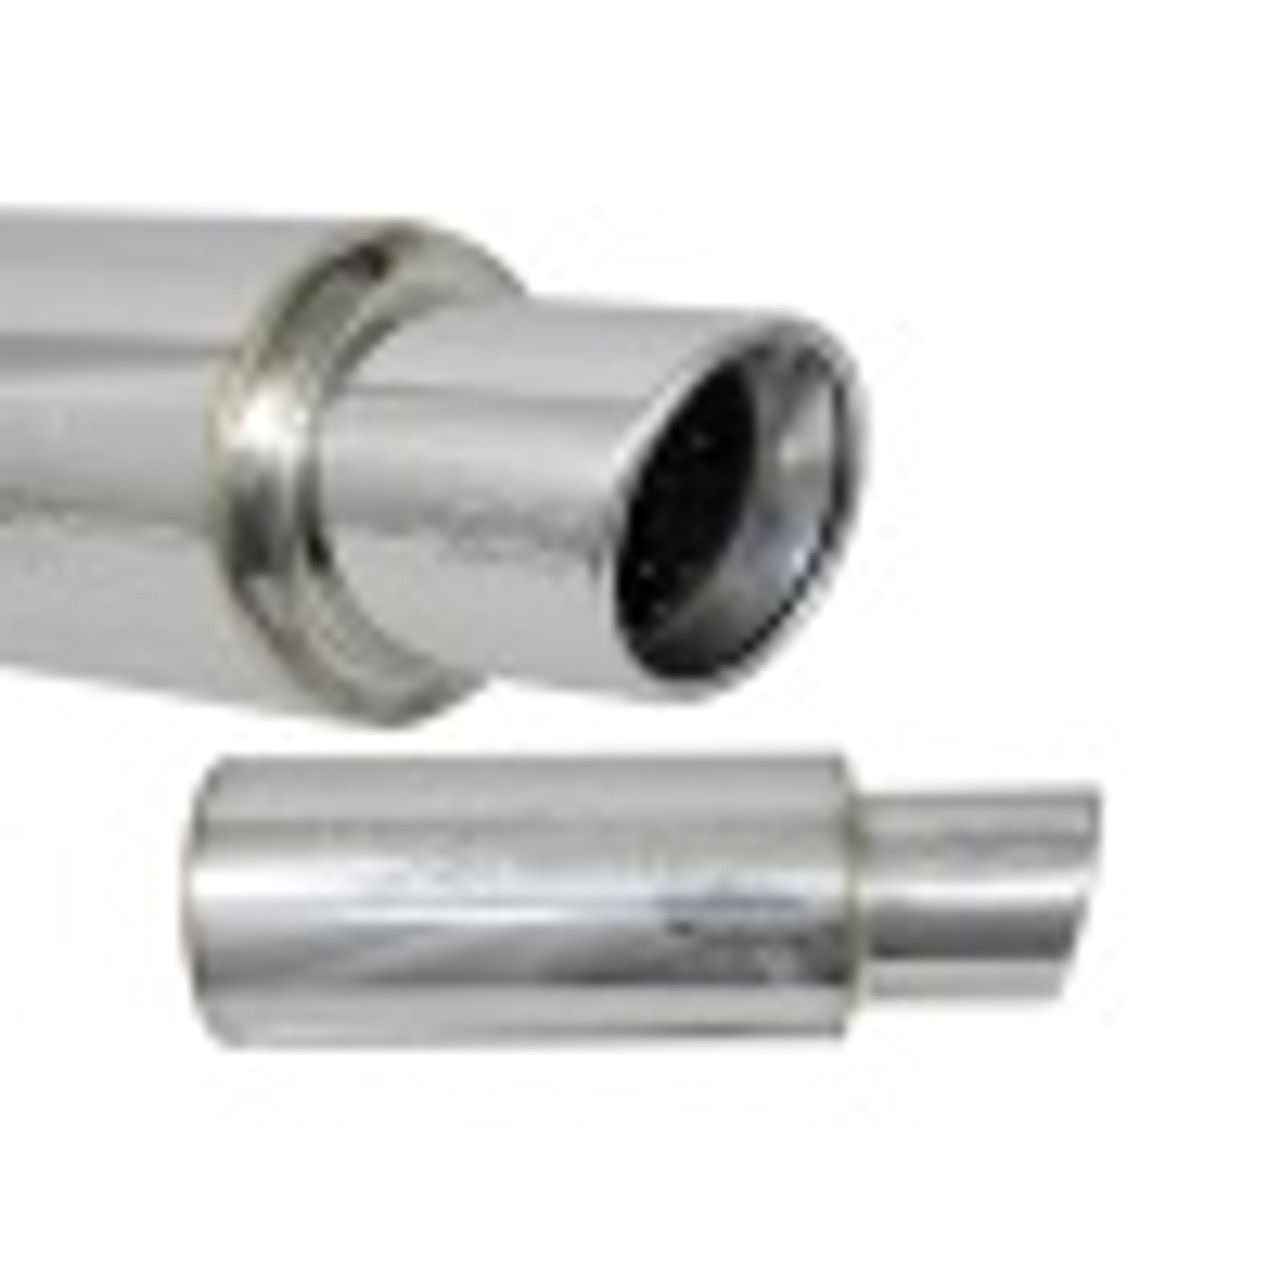 Injen 76MM Universal Muffler with TIP
Tip: Stainless Steel